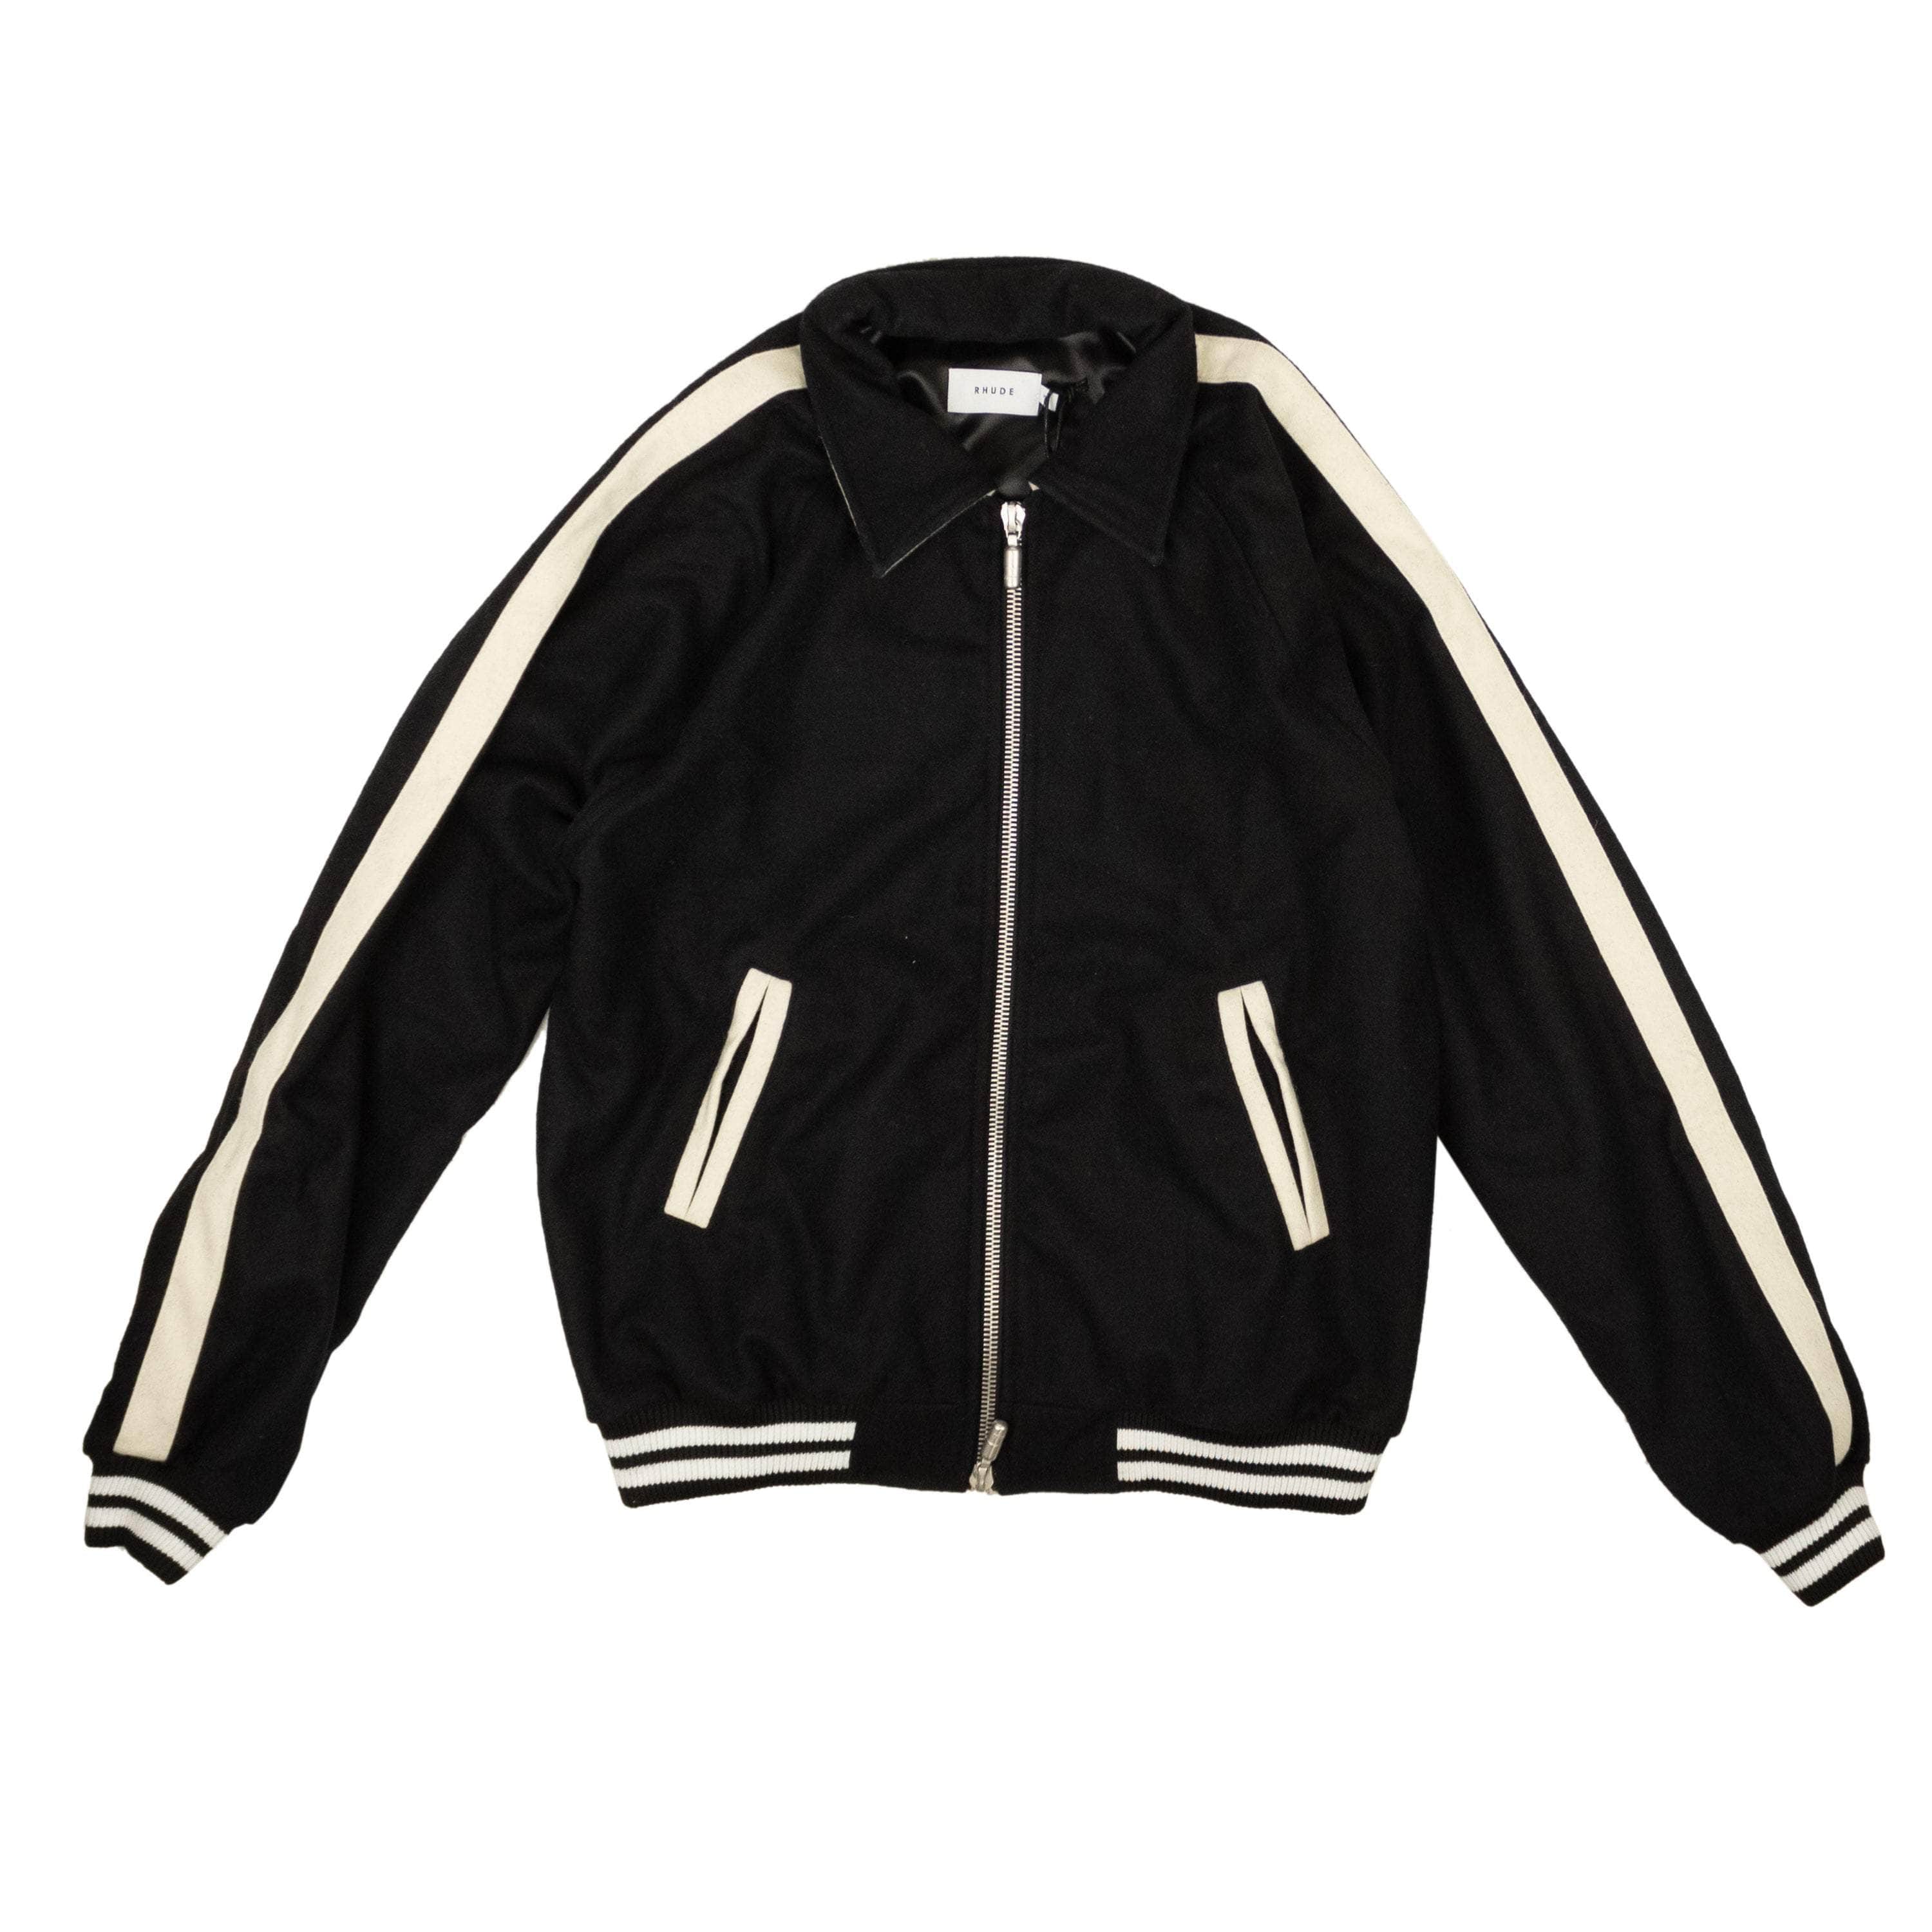 Rhude 750-1000, channelenable-all, chicmi, couponcollection, gender-mens, main-clothing, mens-bombers, mens-shoes, rhude, size-l, size-m, size-s, size-xl, size-xs XS / RHFW22JA456743720372 Black Wool Boys Signature Bomber Jacket RHD-XOTW-0013/XS RHD-XOTW-0013/XS